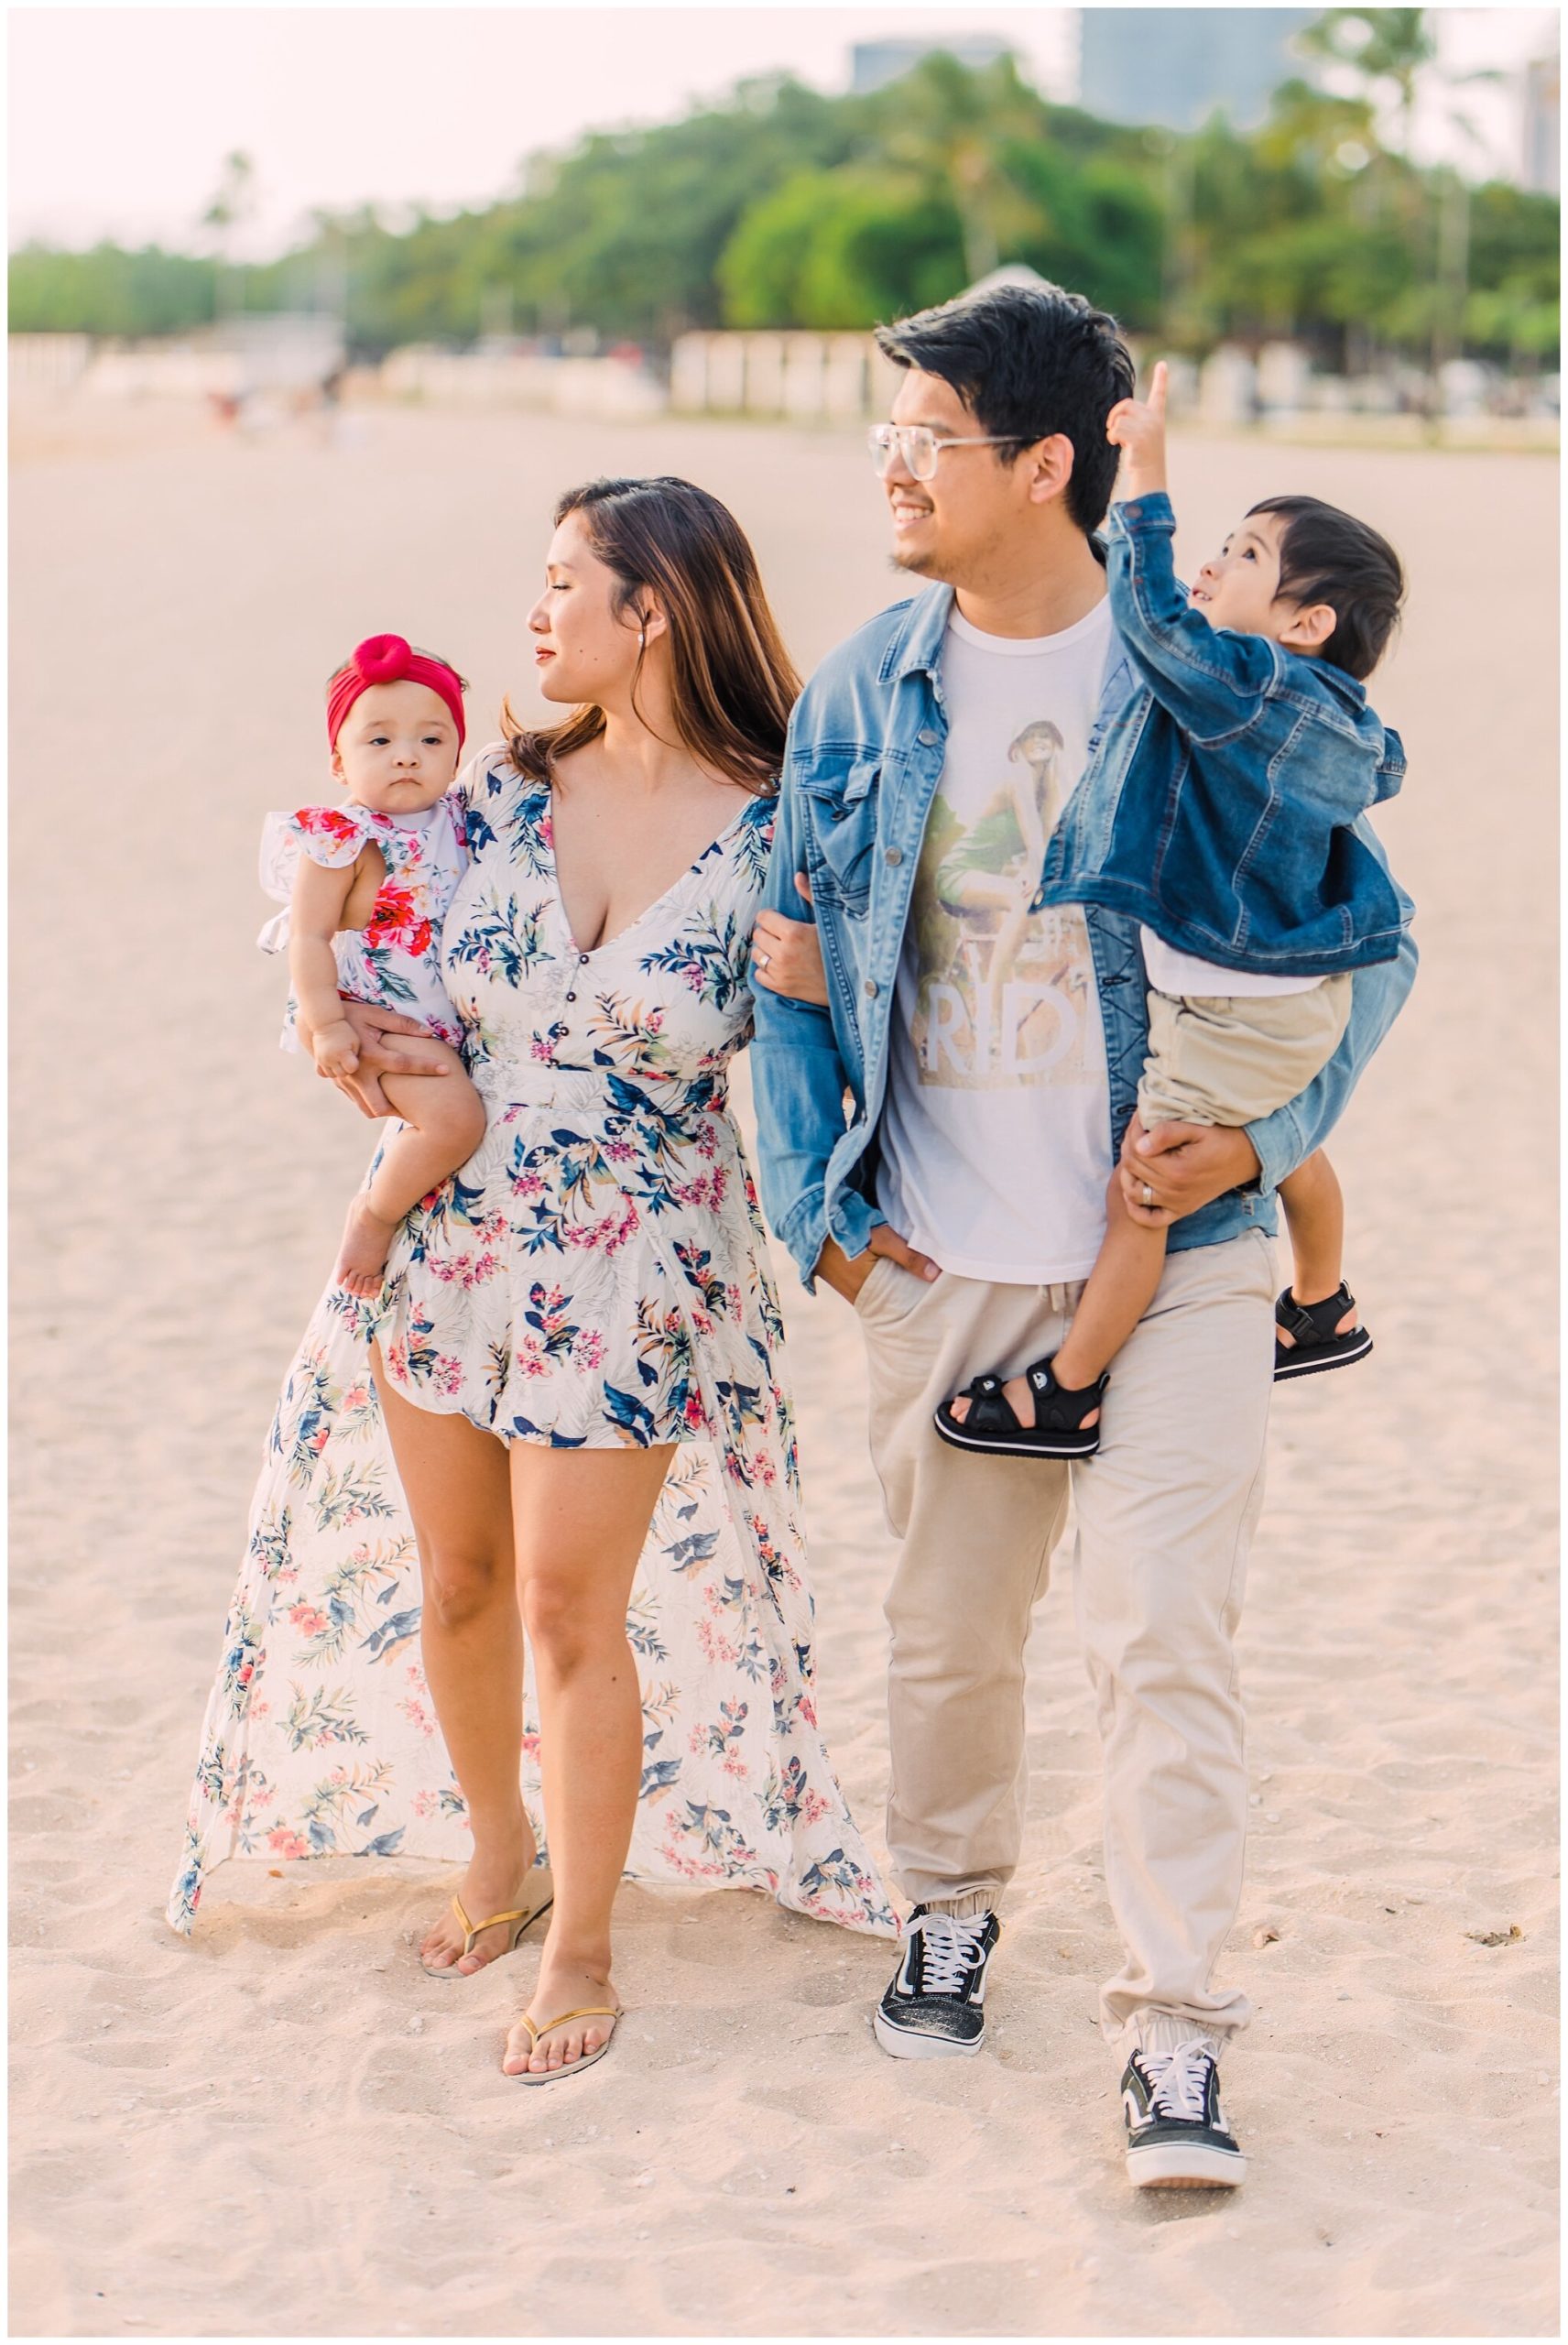 couple with two children walk together on a beach in hawaii 